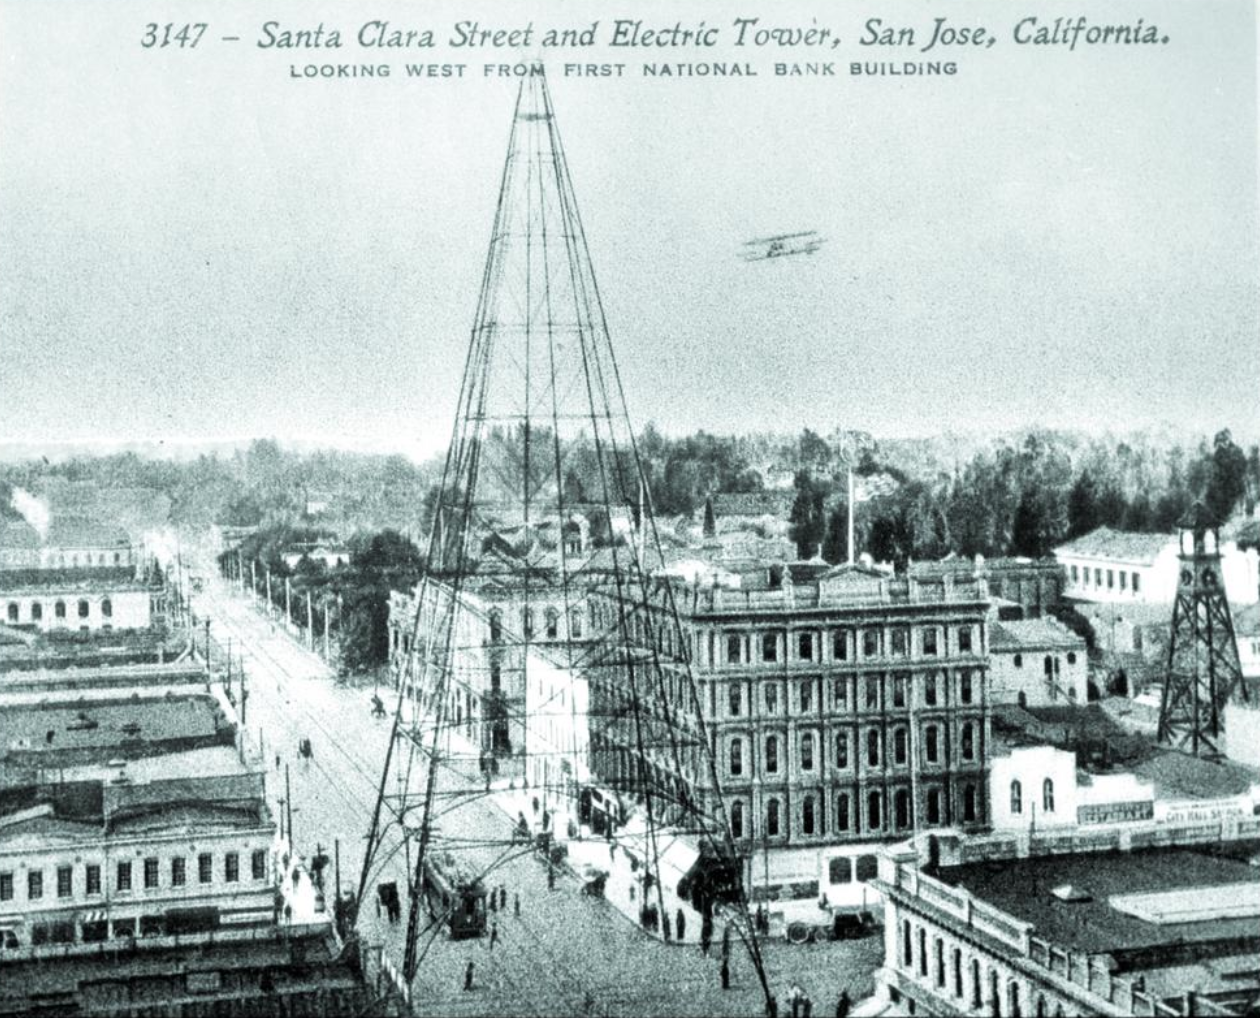 The Electric Light Tower was proposed by the publisher of the San Jose Mercury, the precursor of the Mercury News. In 1881, the tower was a pioneering use of electricity for municipal purposes.